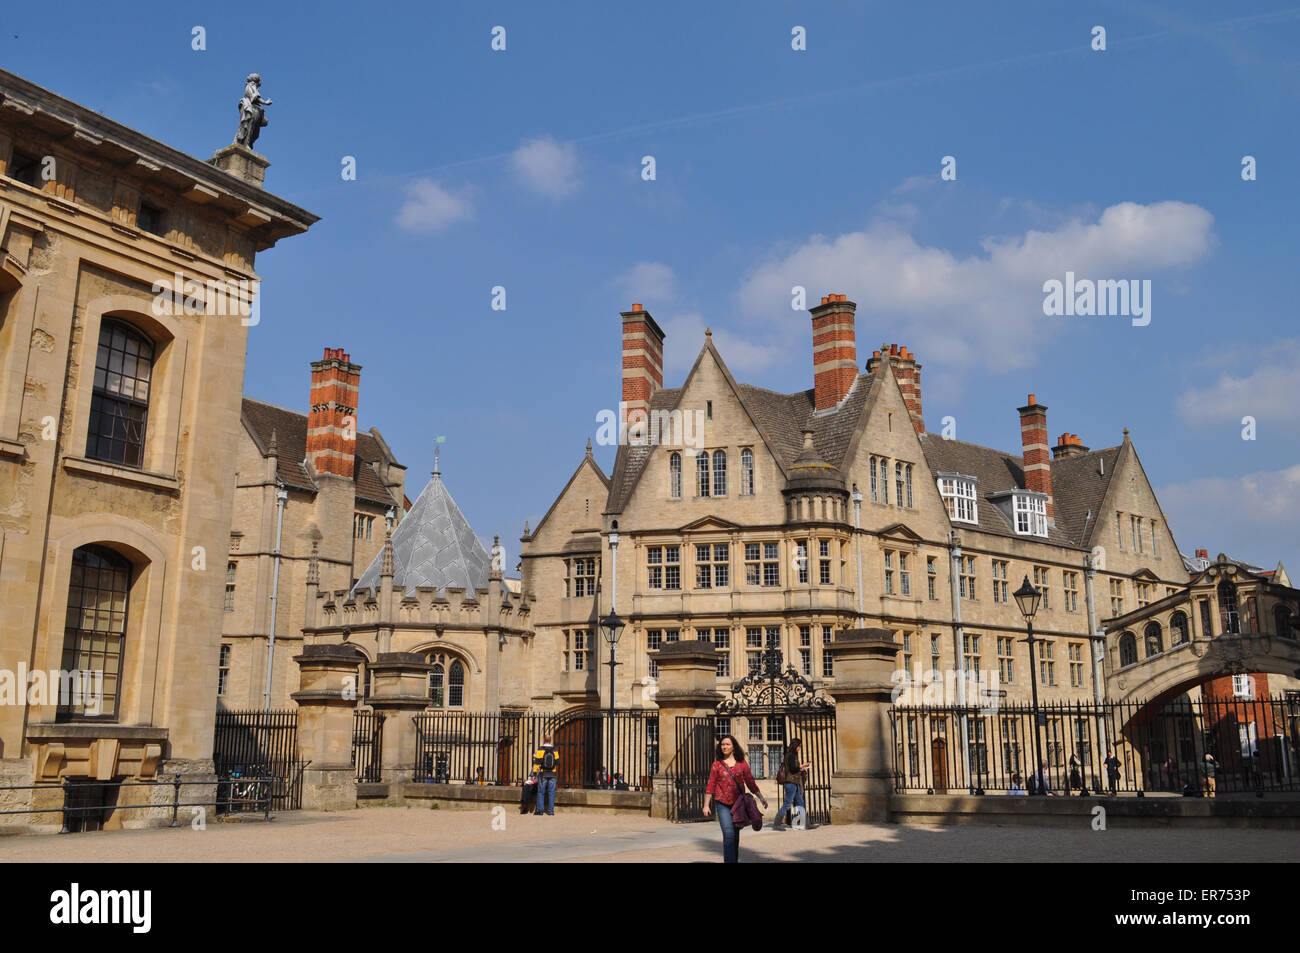 Looking towards Hertford College & Bridge of Sighs from the Clarendon Building, Oxford, England Stock Photo